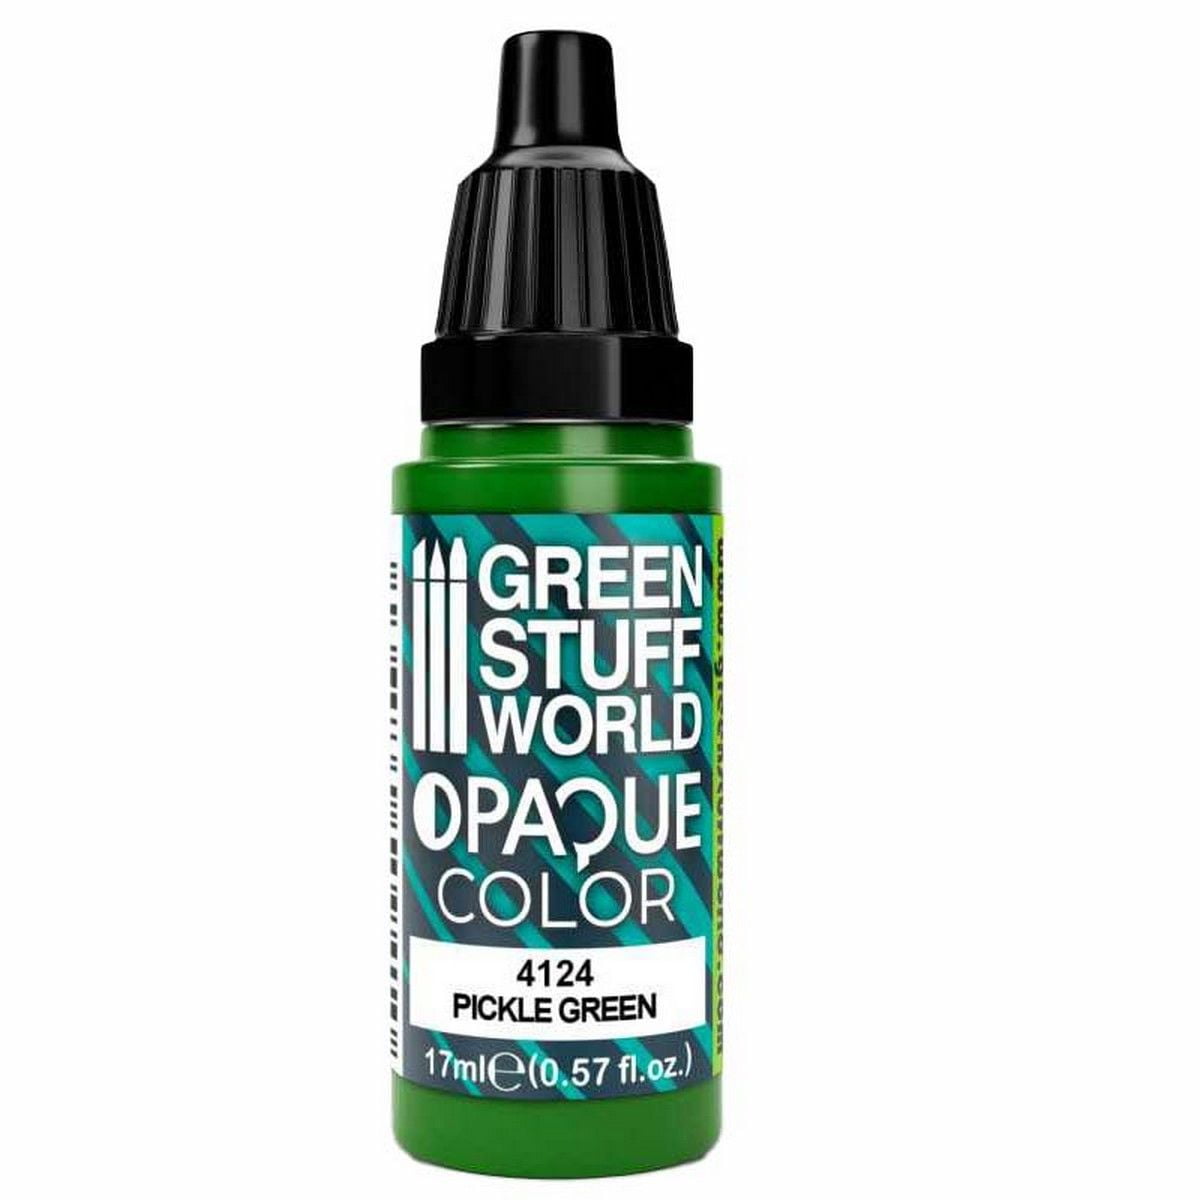 Opaque Colors - Pickle Green - 17ml